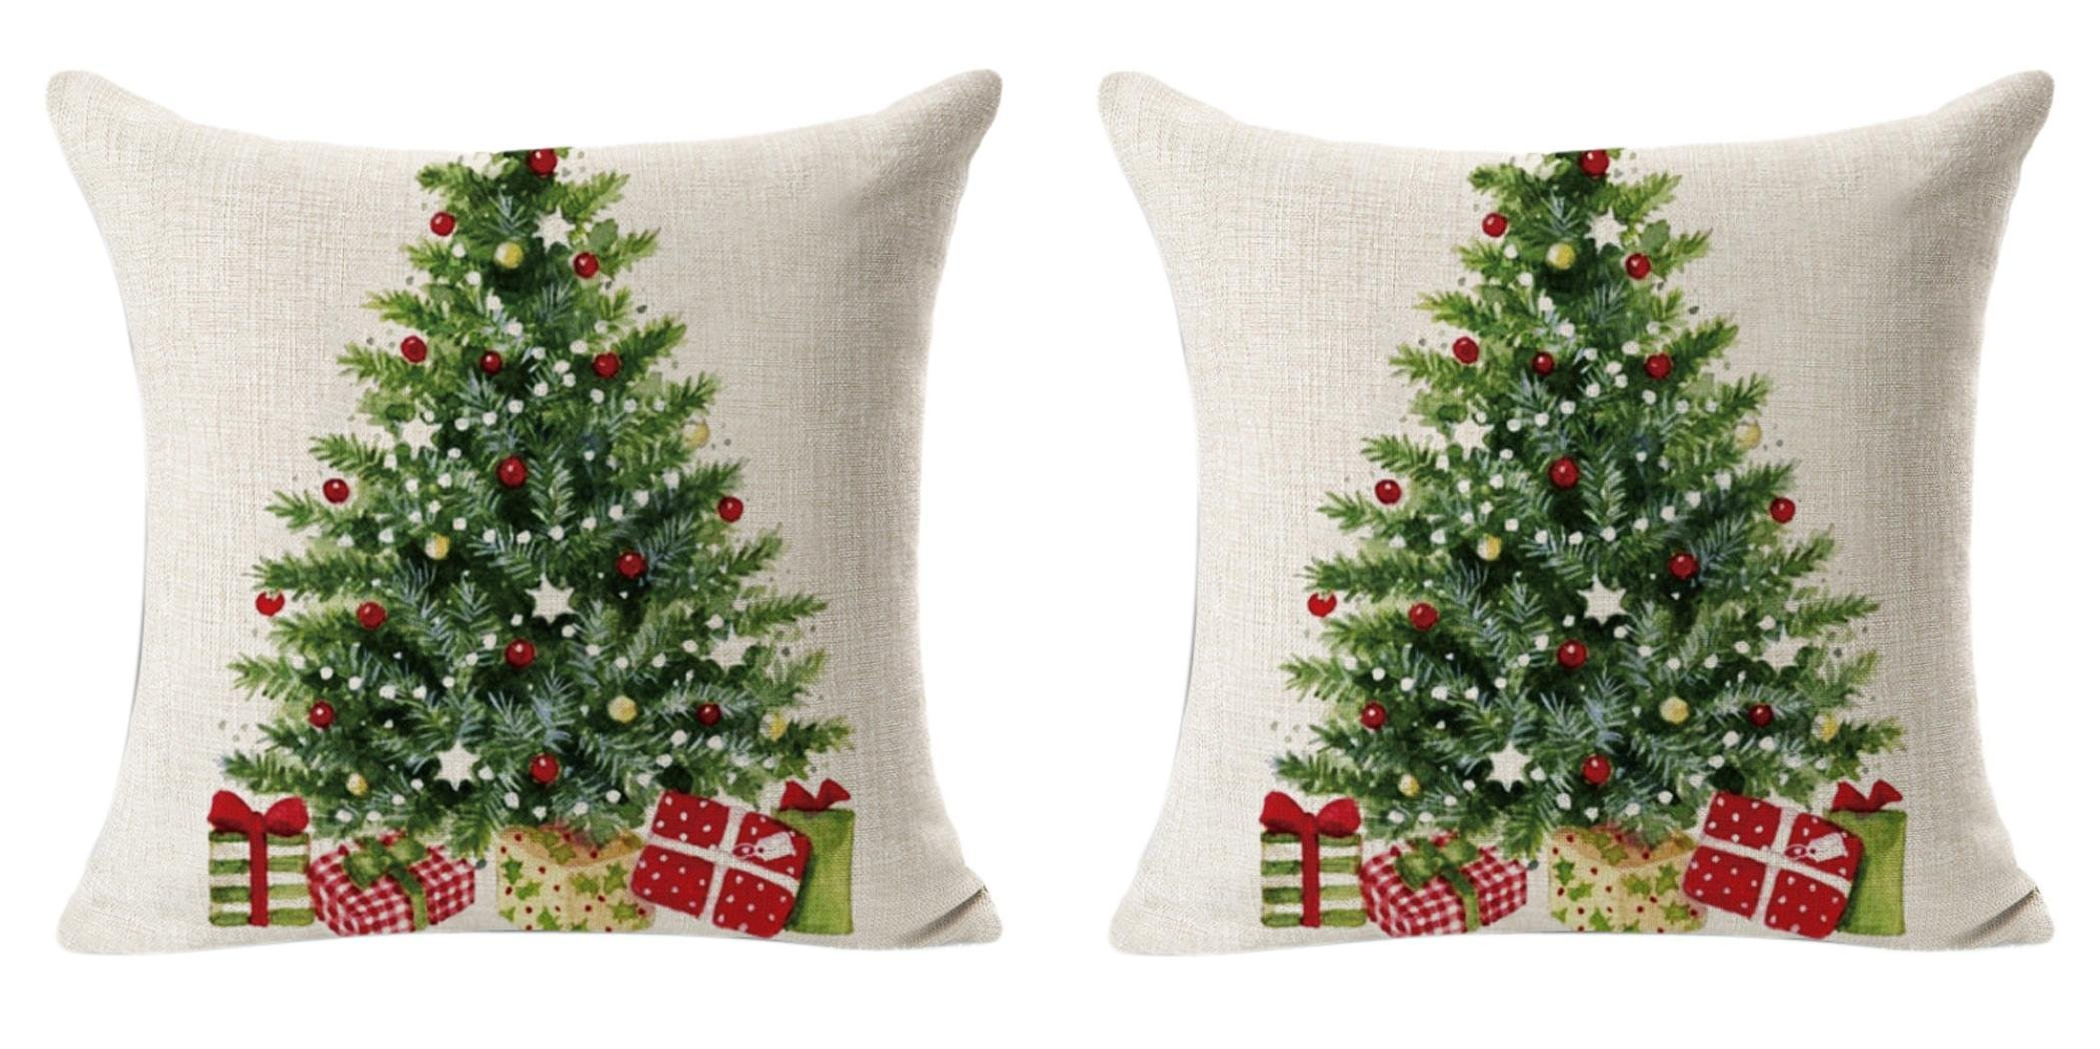 Christmas Tree Pillow Cover Only $1.25 SHIPPED!!